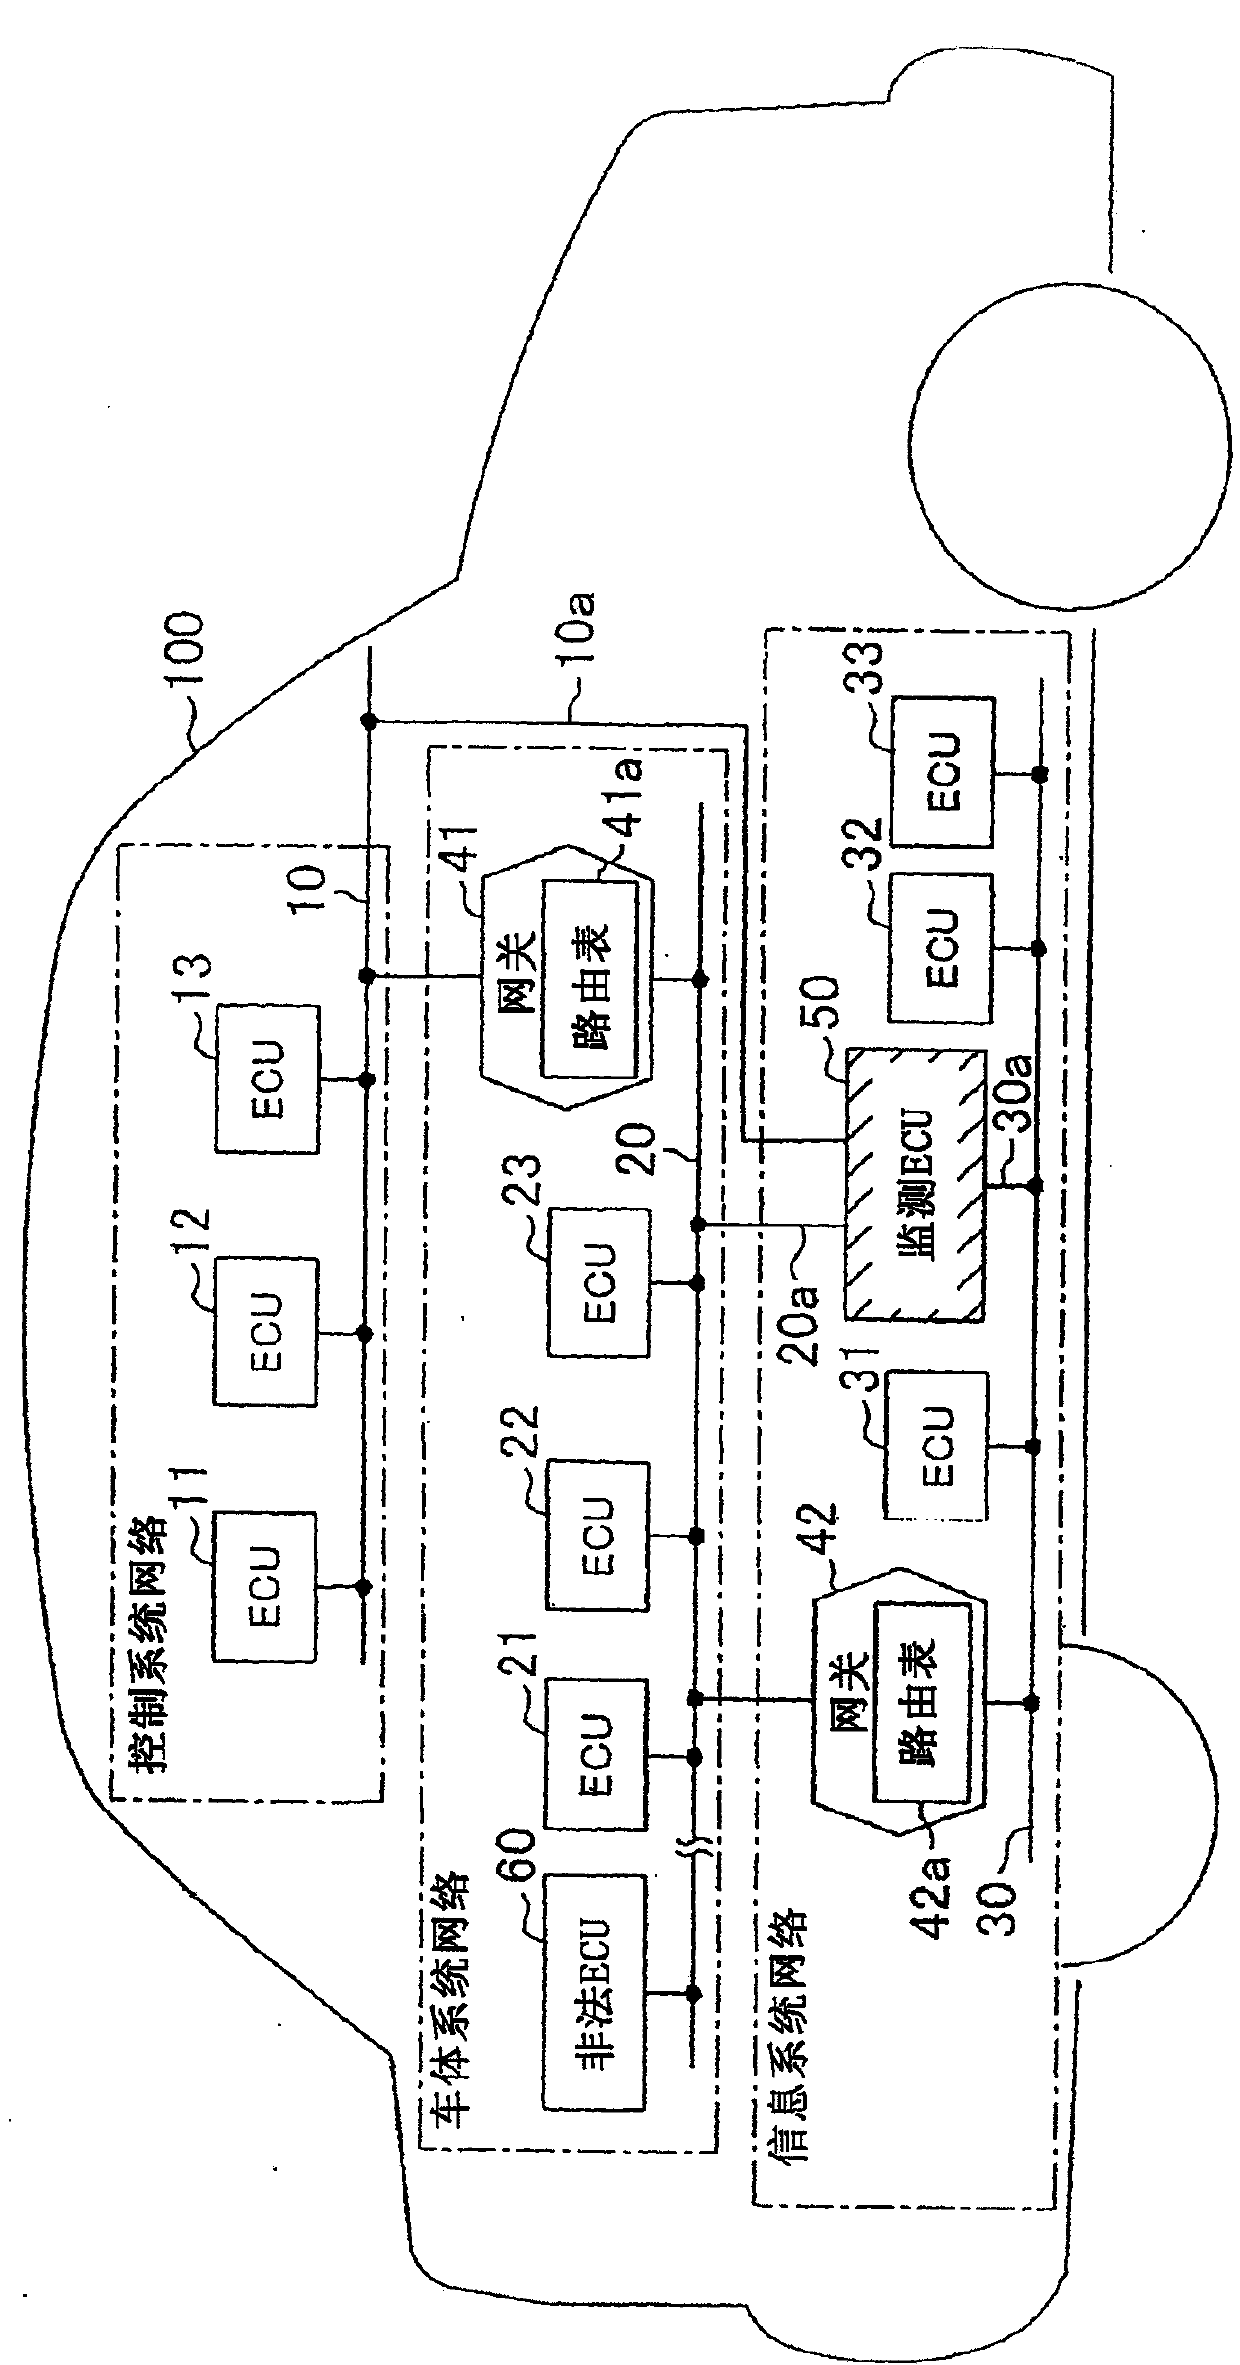 Vehilce network monitoring method and apparatus